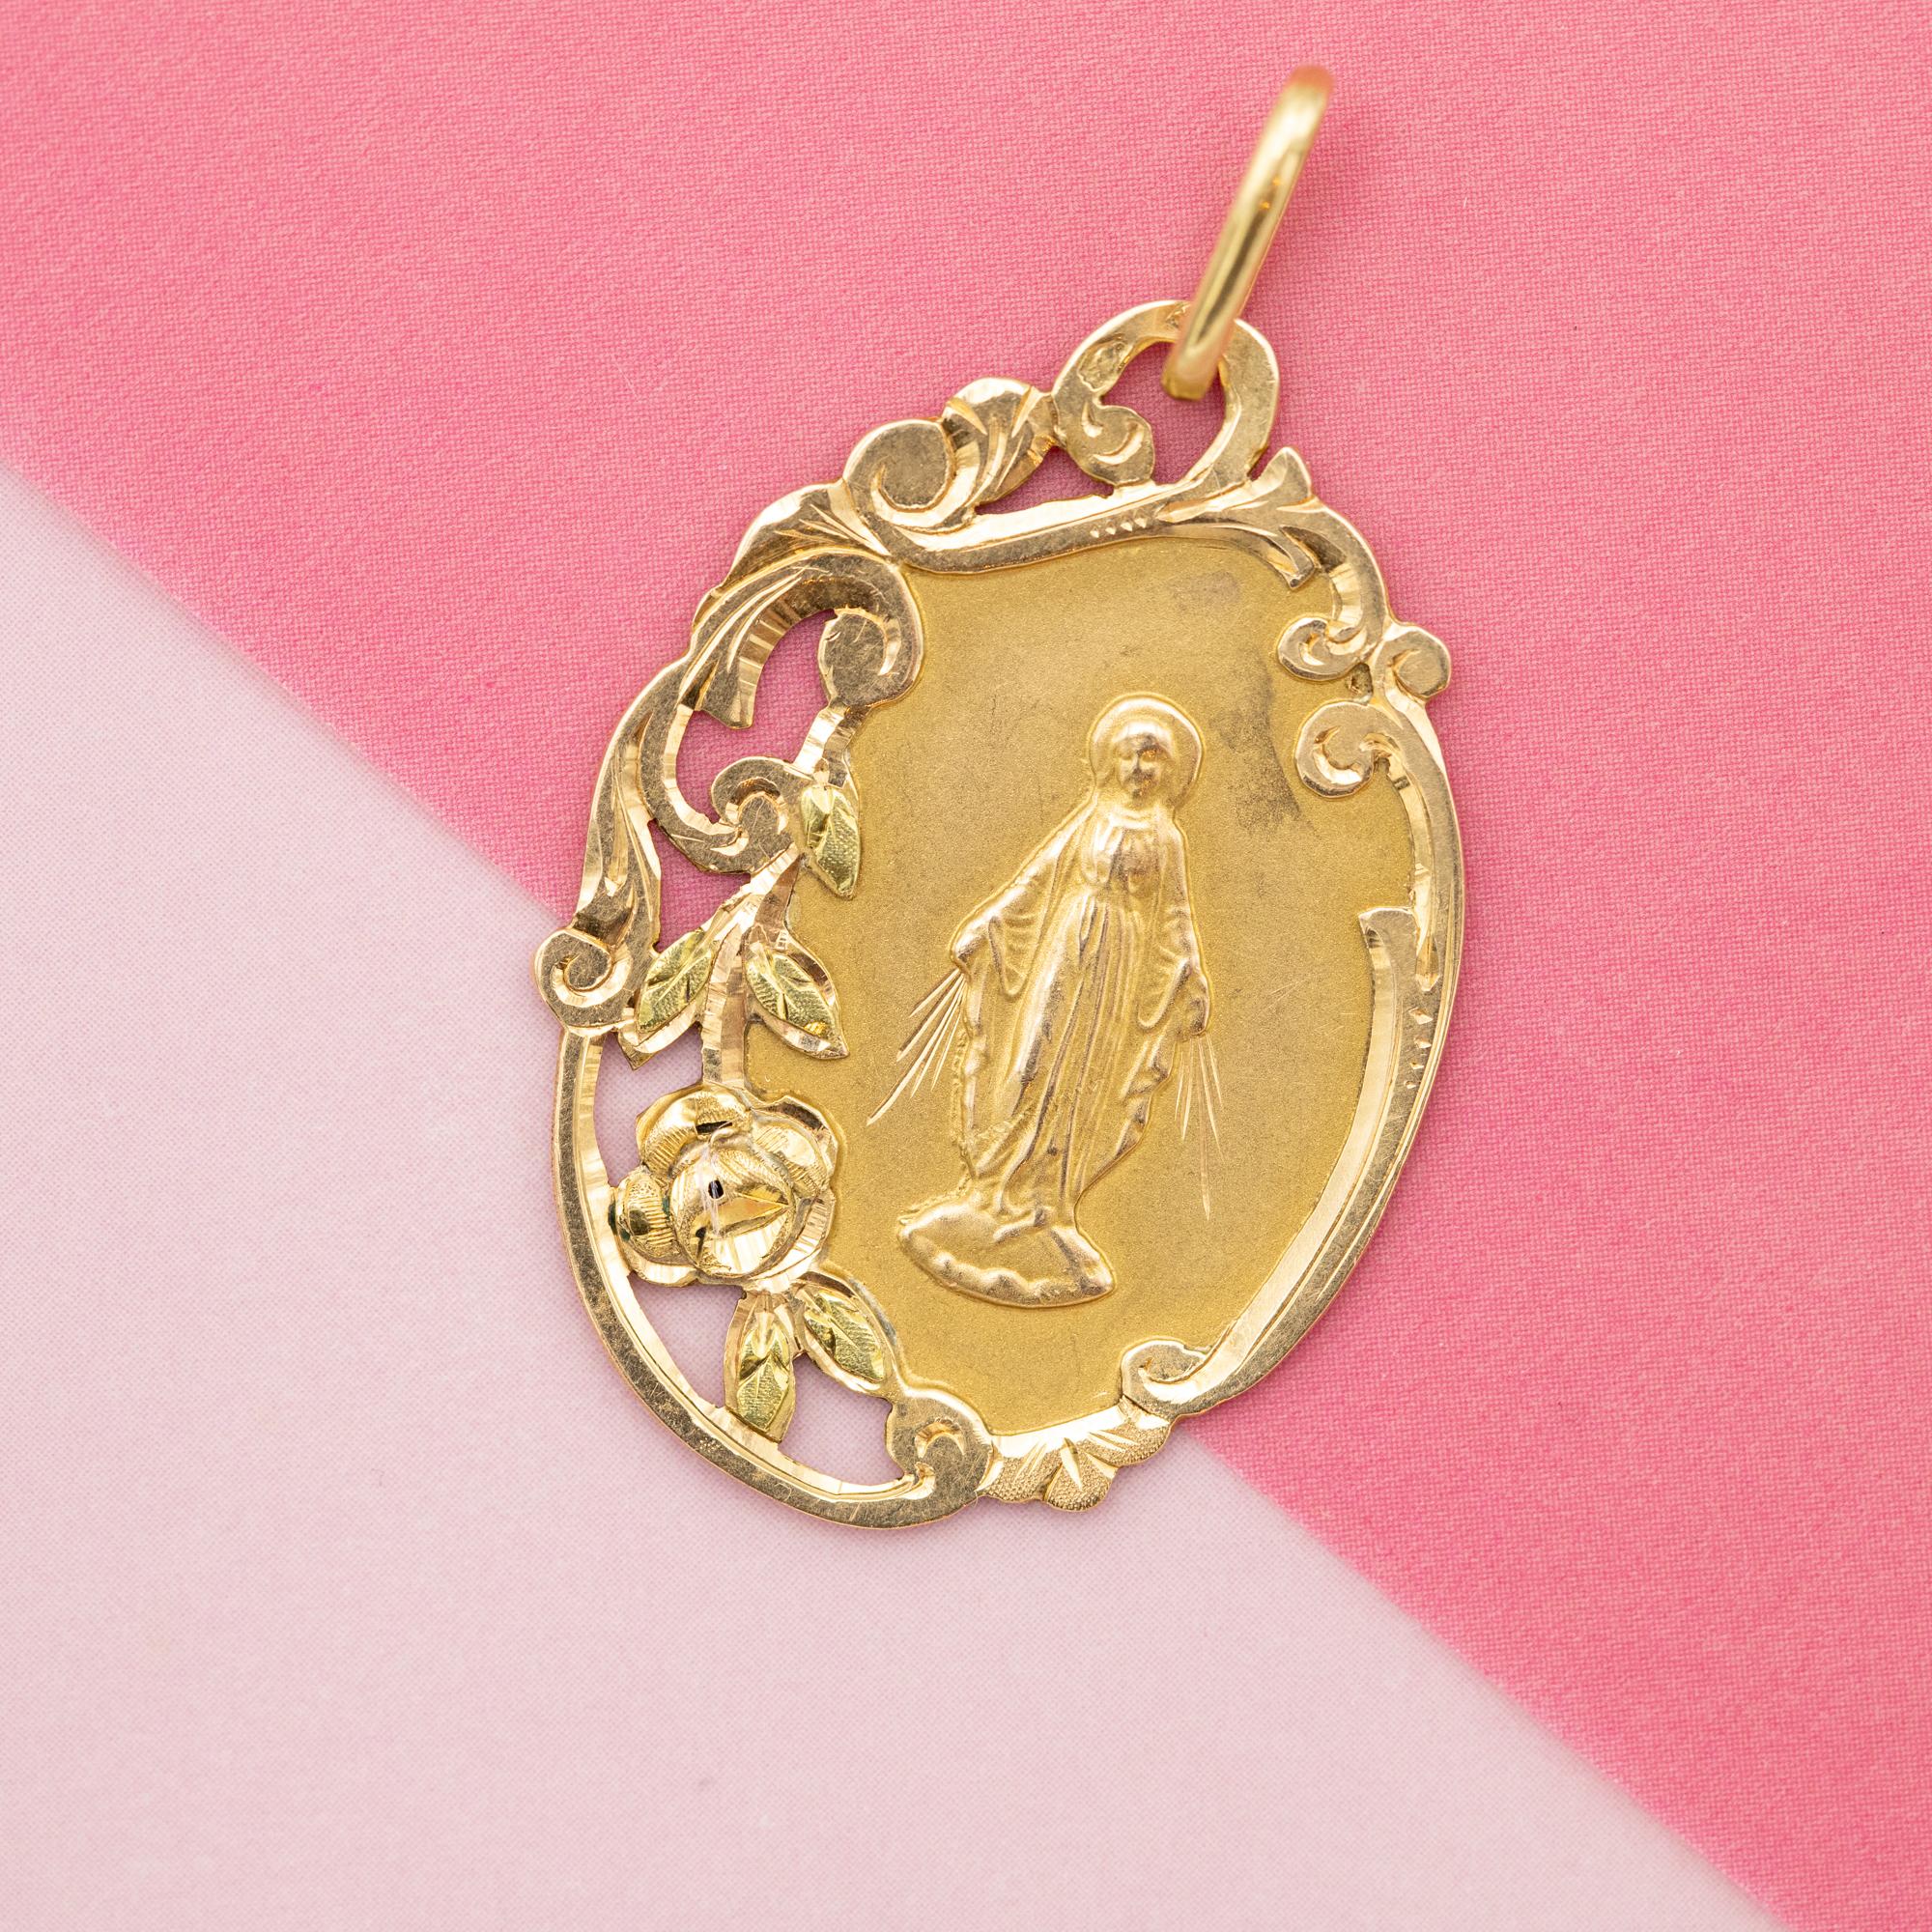 For sale is this stunning mother Mary charm. It depicts a well detailled virgin Mary flanked by hand engraved leafs. This Antique pendant has a floral and warm look thanks to the foliate decoration encircling this religious scene. The maker of this